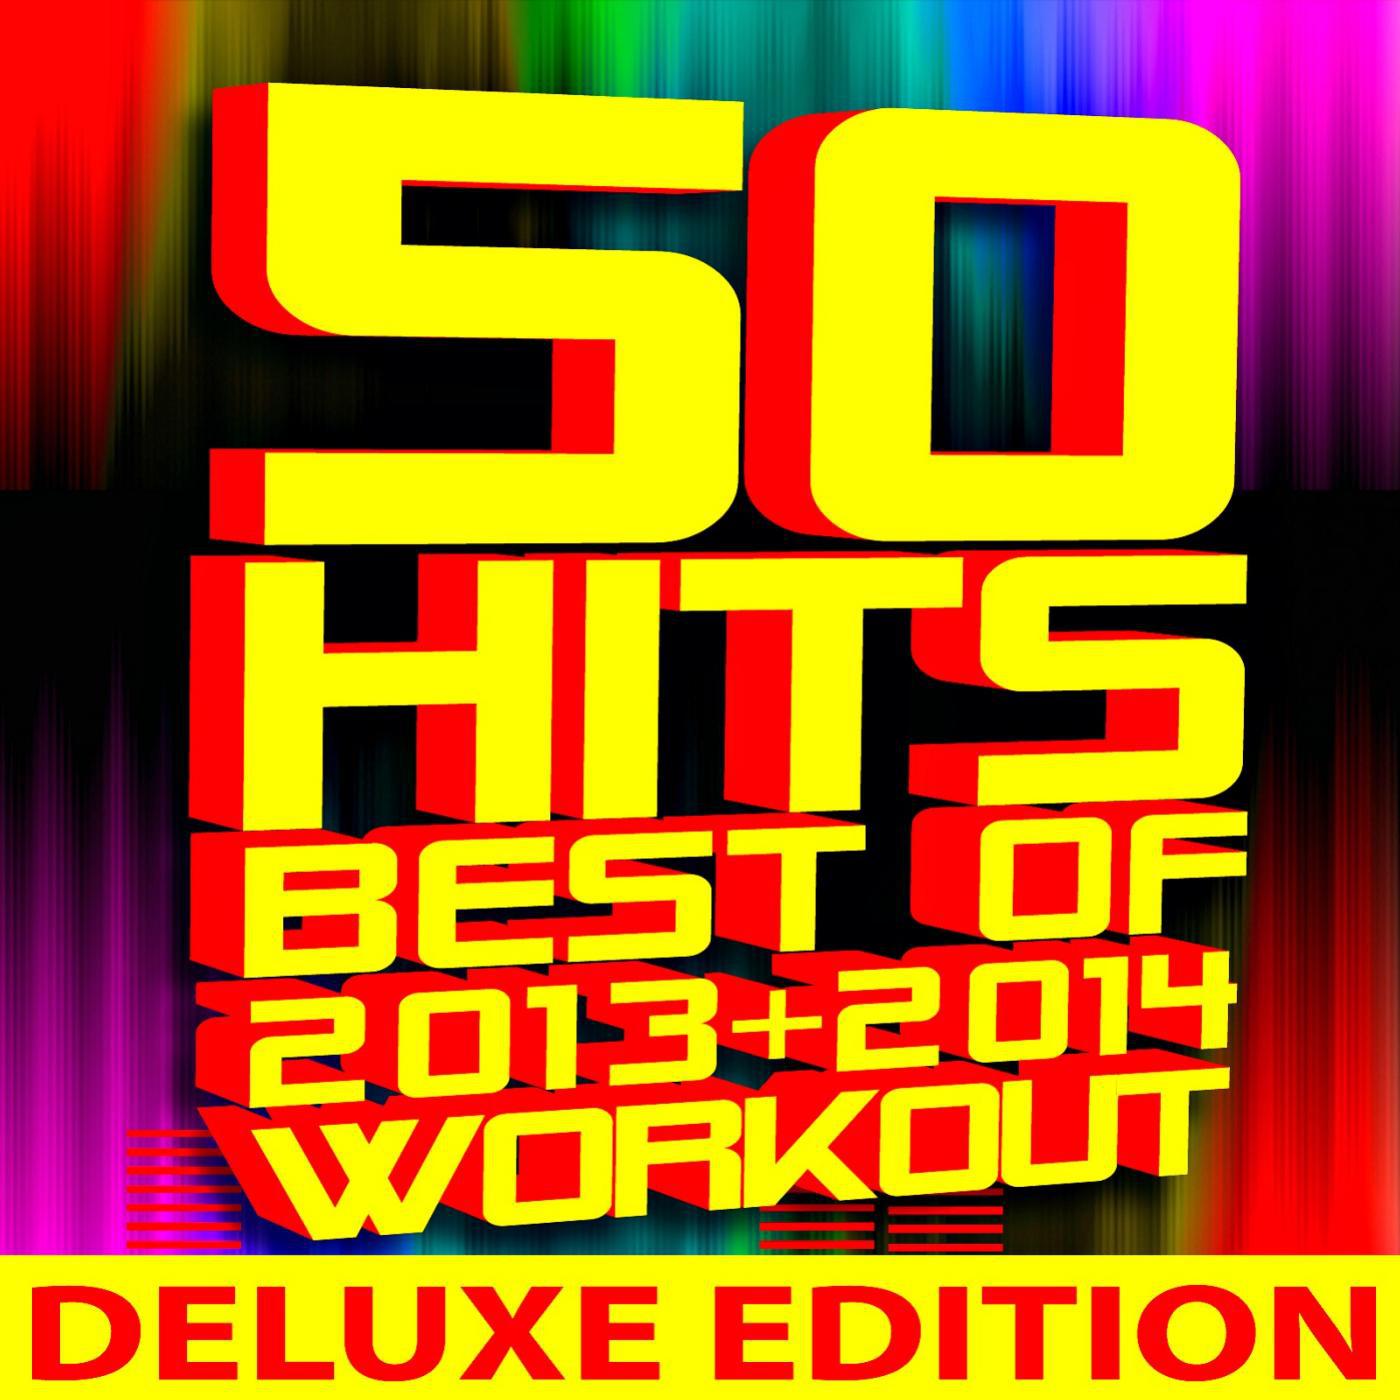 Постер альбома 50 Hits! Best of 2013 + 2014 Workout (Deluxe Edition)